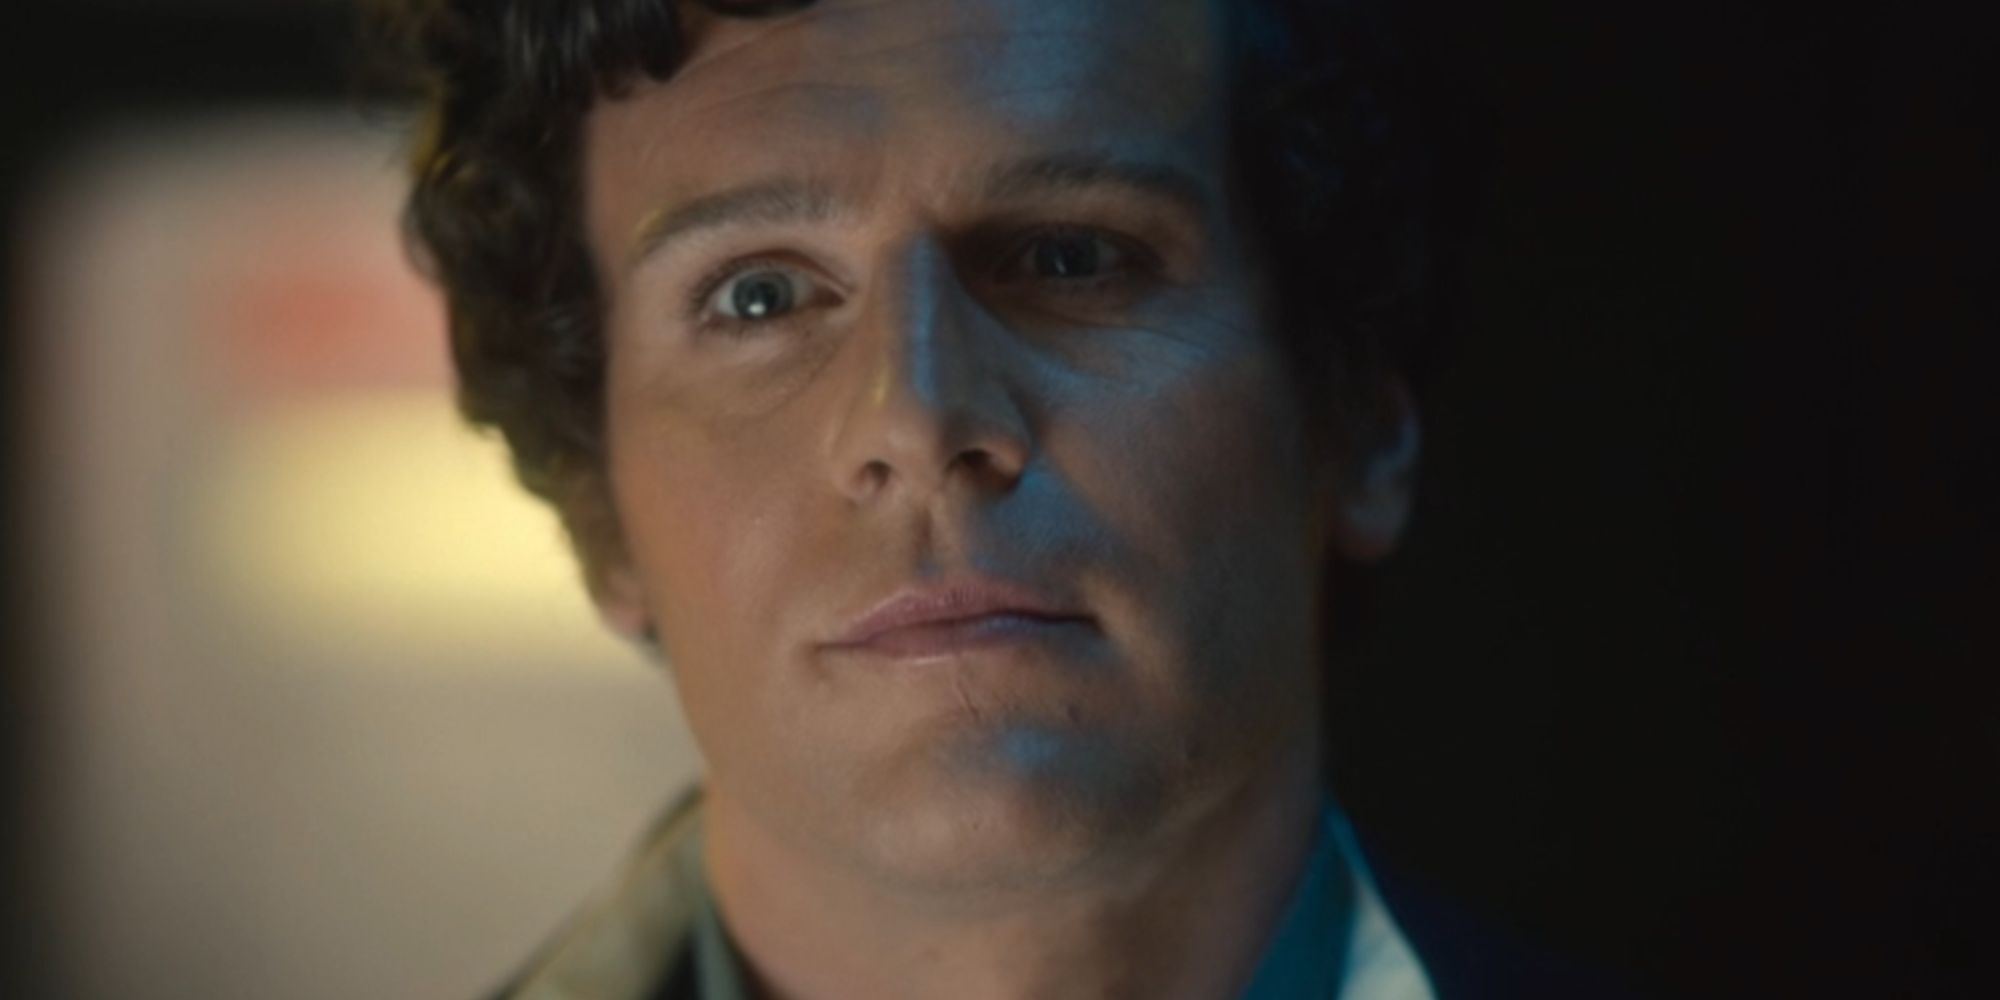 Jonathon Groff looking relaxed as Rogue in Doctor Who.